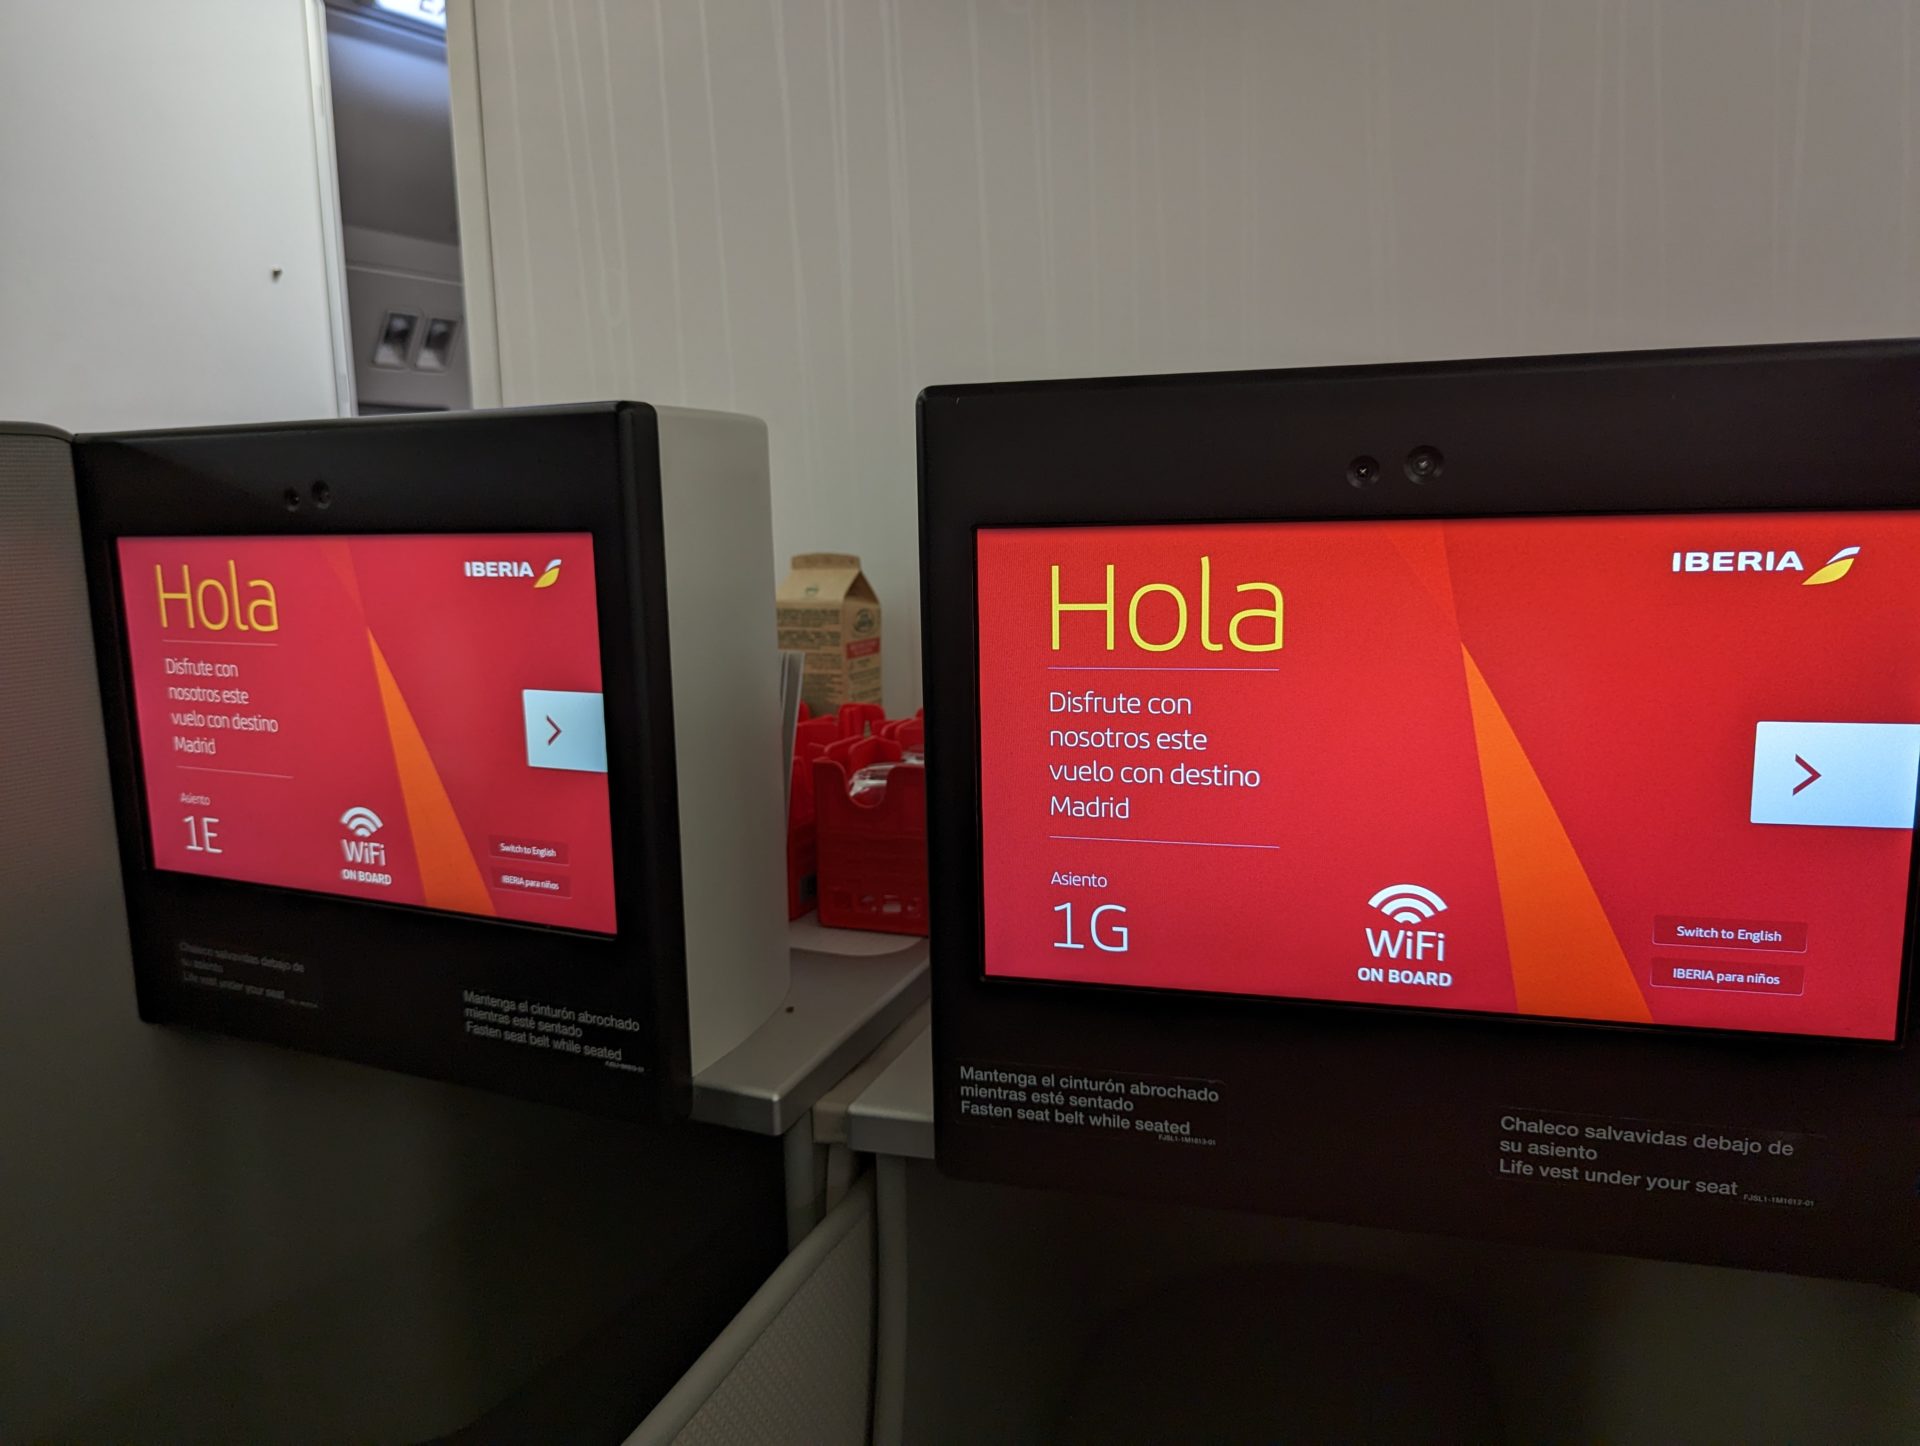 a two black rectangular computers with red and yellow text